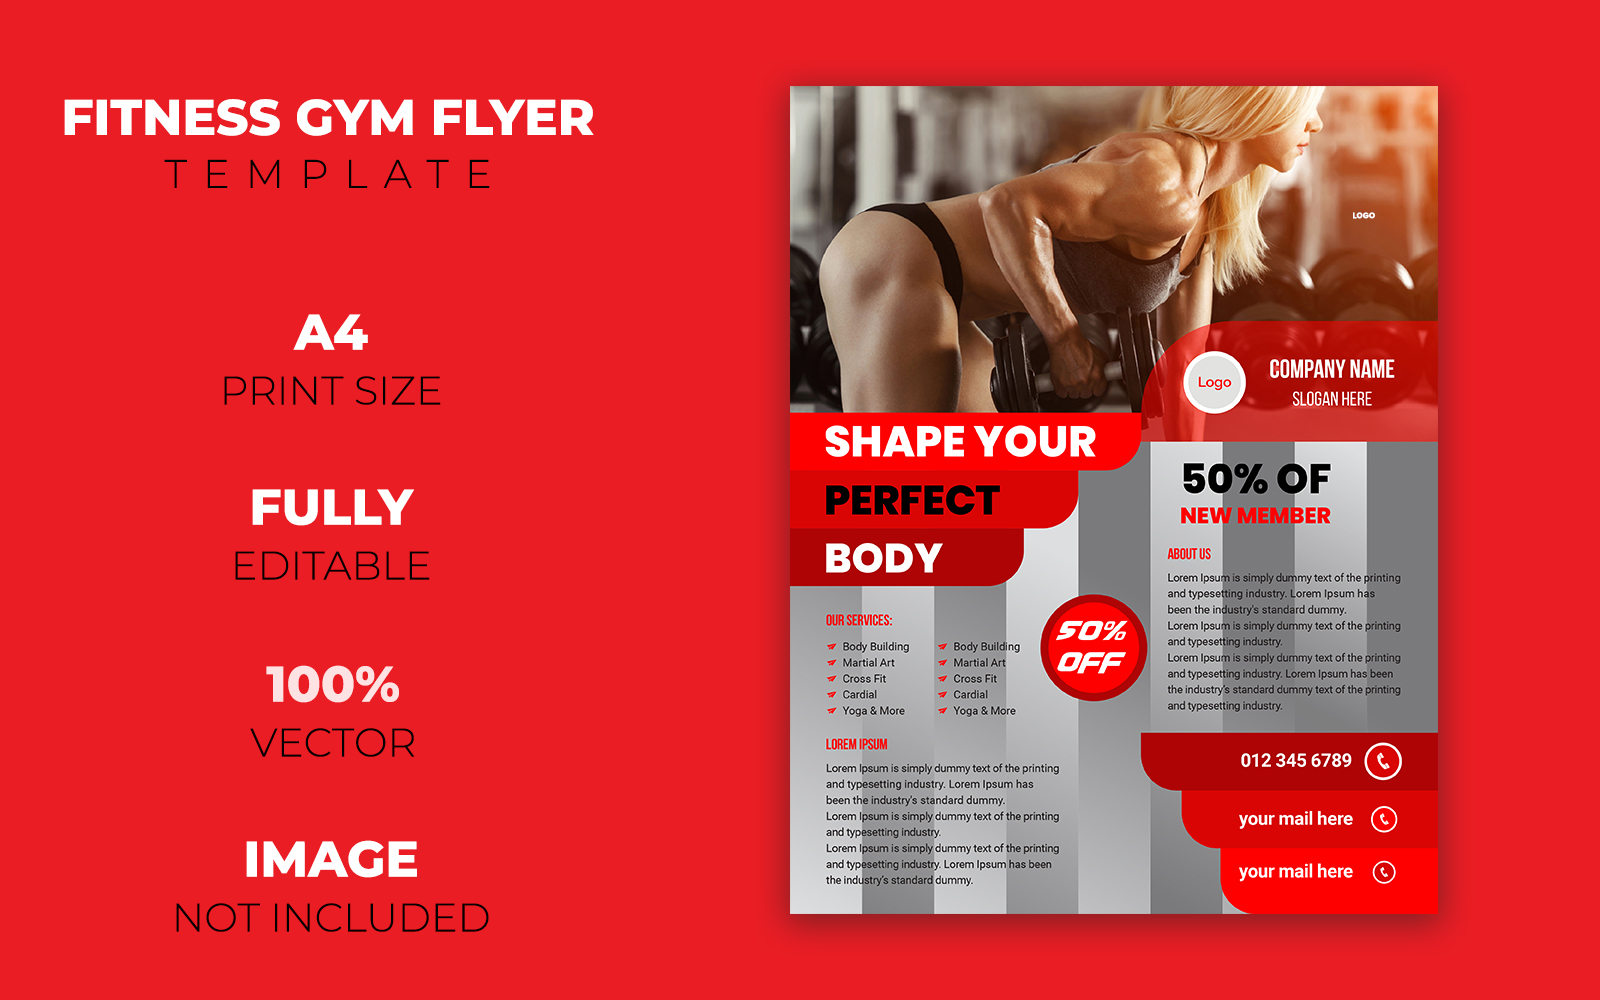 Fitness Gym Flyer Design - Corporate Identity Template